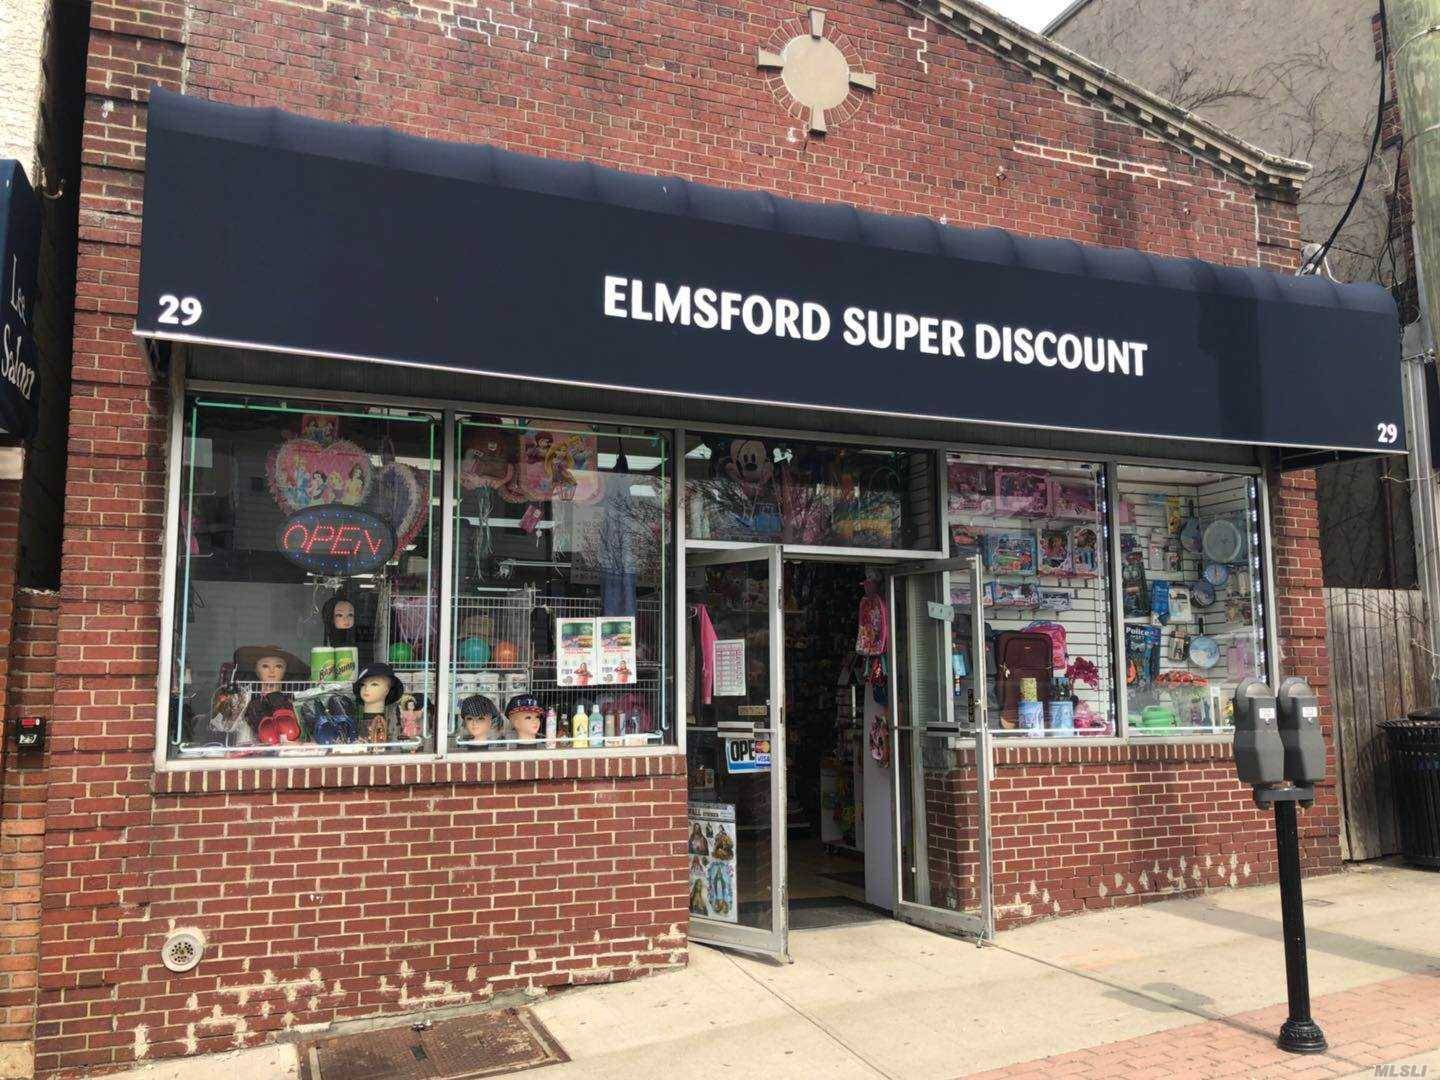 Well Located All-Brick Building Retail Building On Busy Route 119 (East Main Street) In Downtown Elmsford.